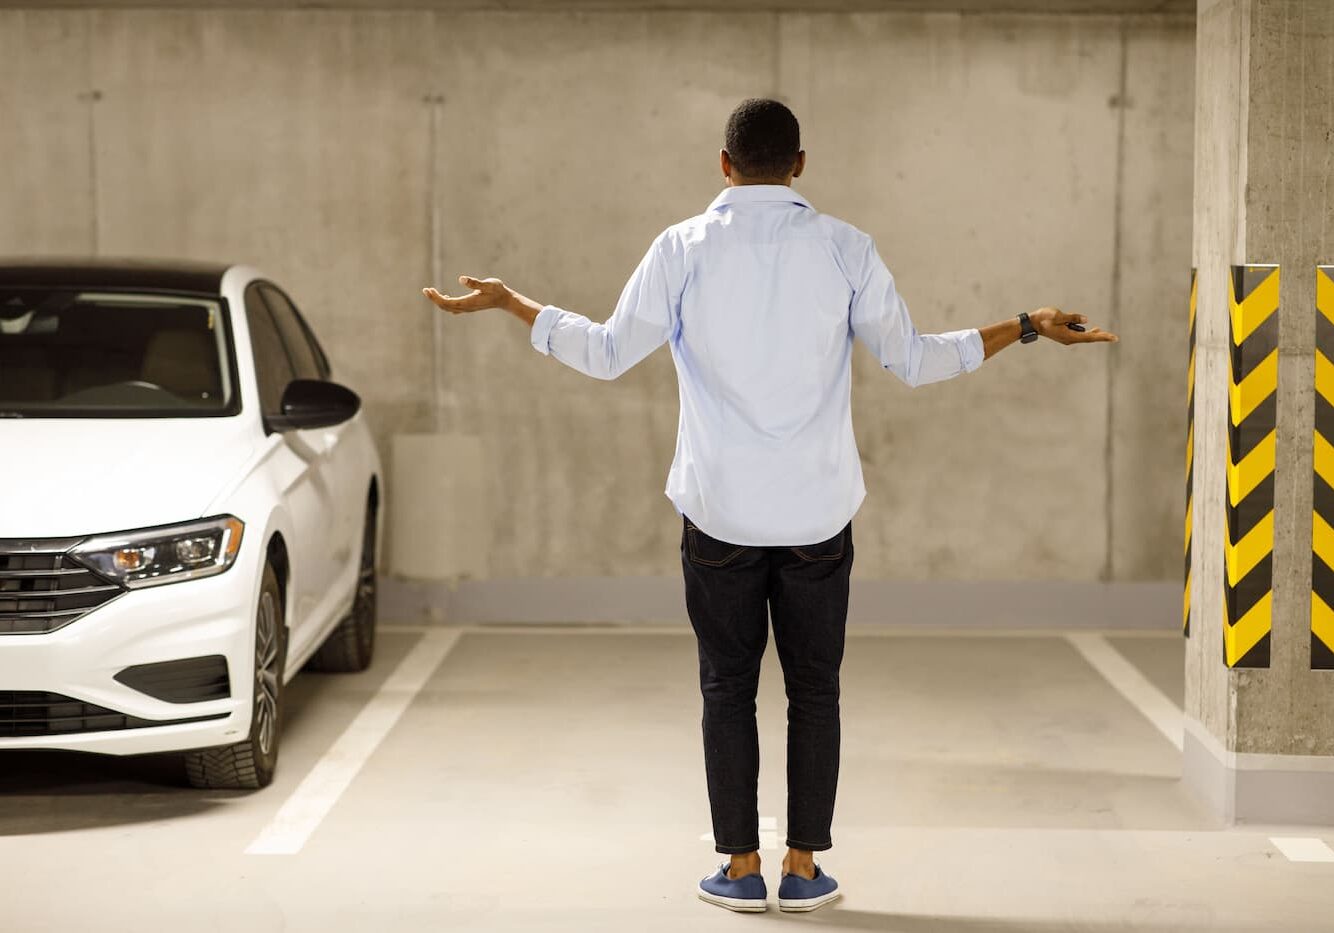 A man standing in a parking lot with his arms outstretched